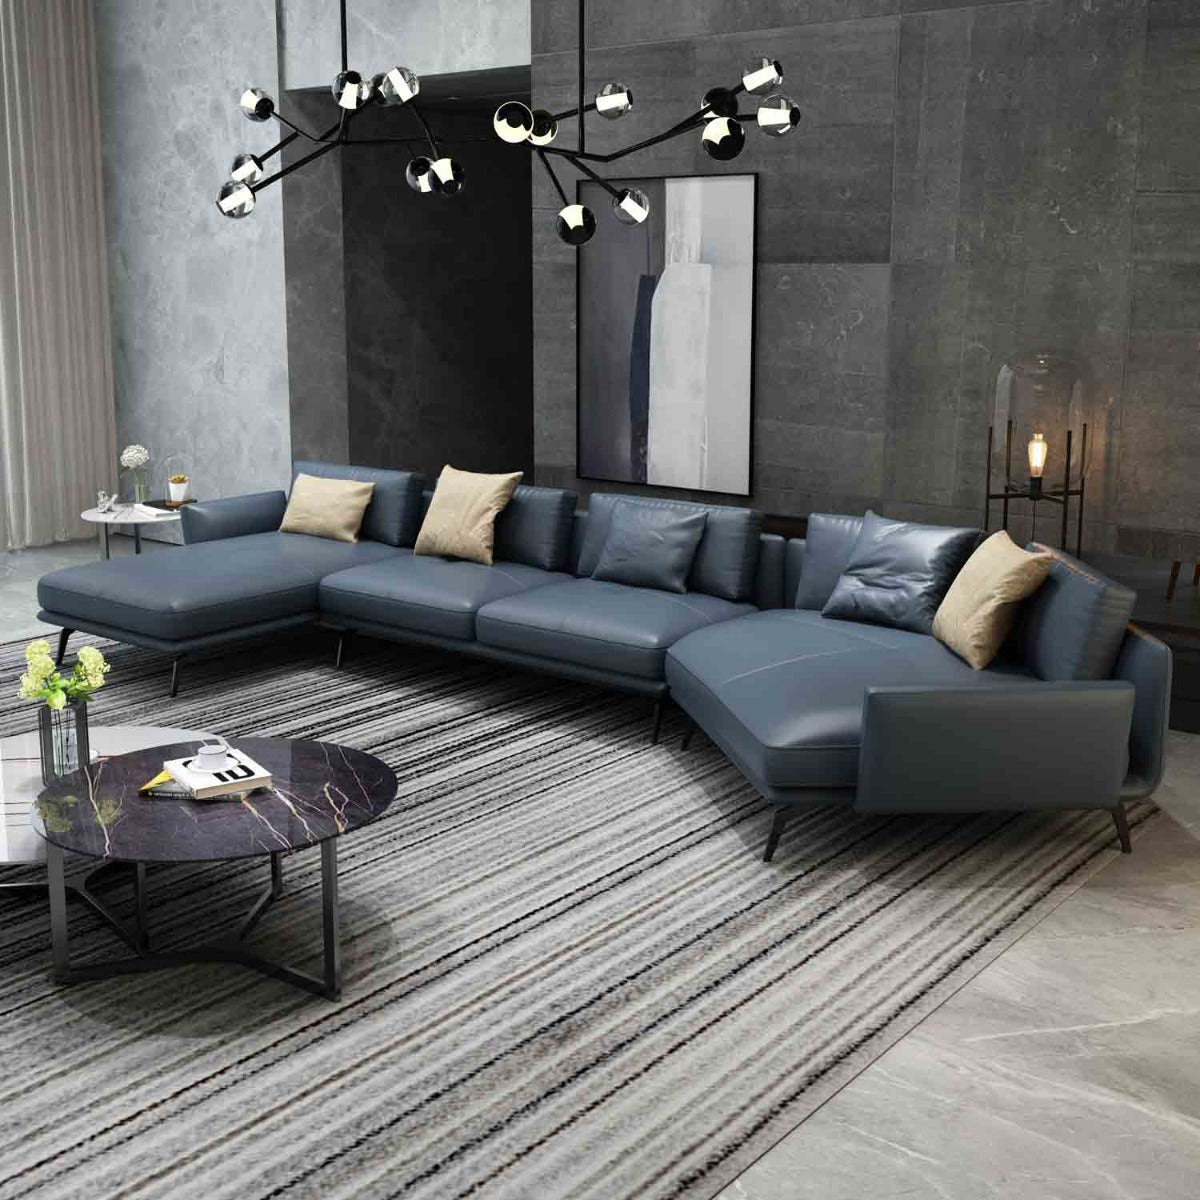 European Furniture - Santiago Sectional in Italian Grey Leather - 83545L-3LHF - New Star Living